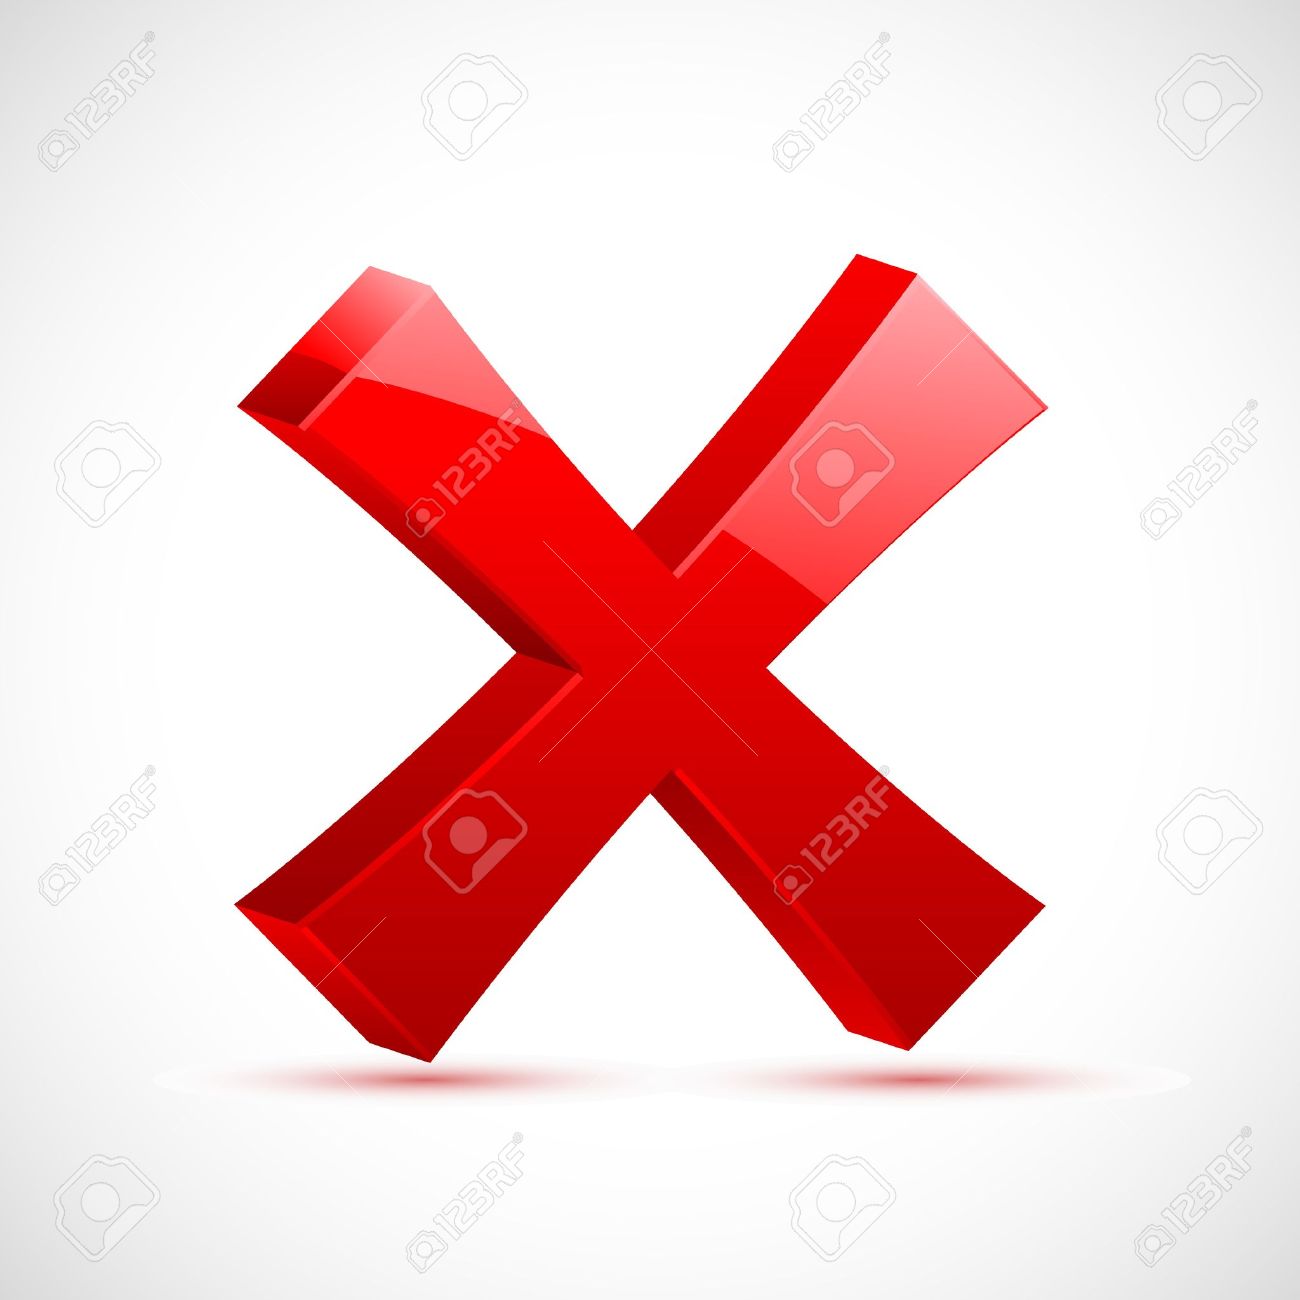 illustration of red cross mark on isolated background Stock Vector - 8778264